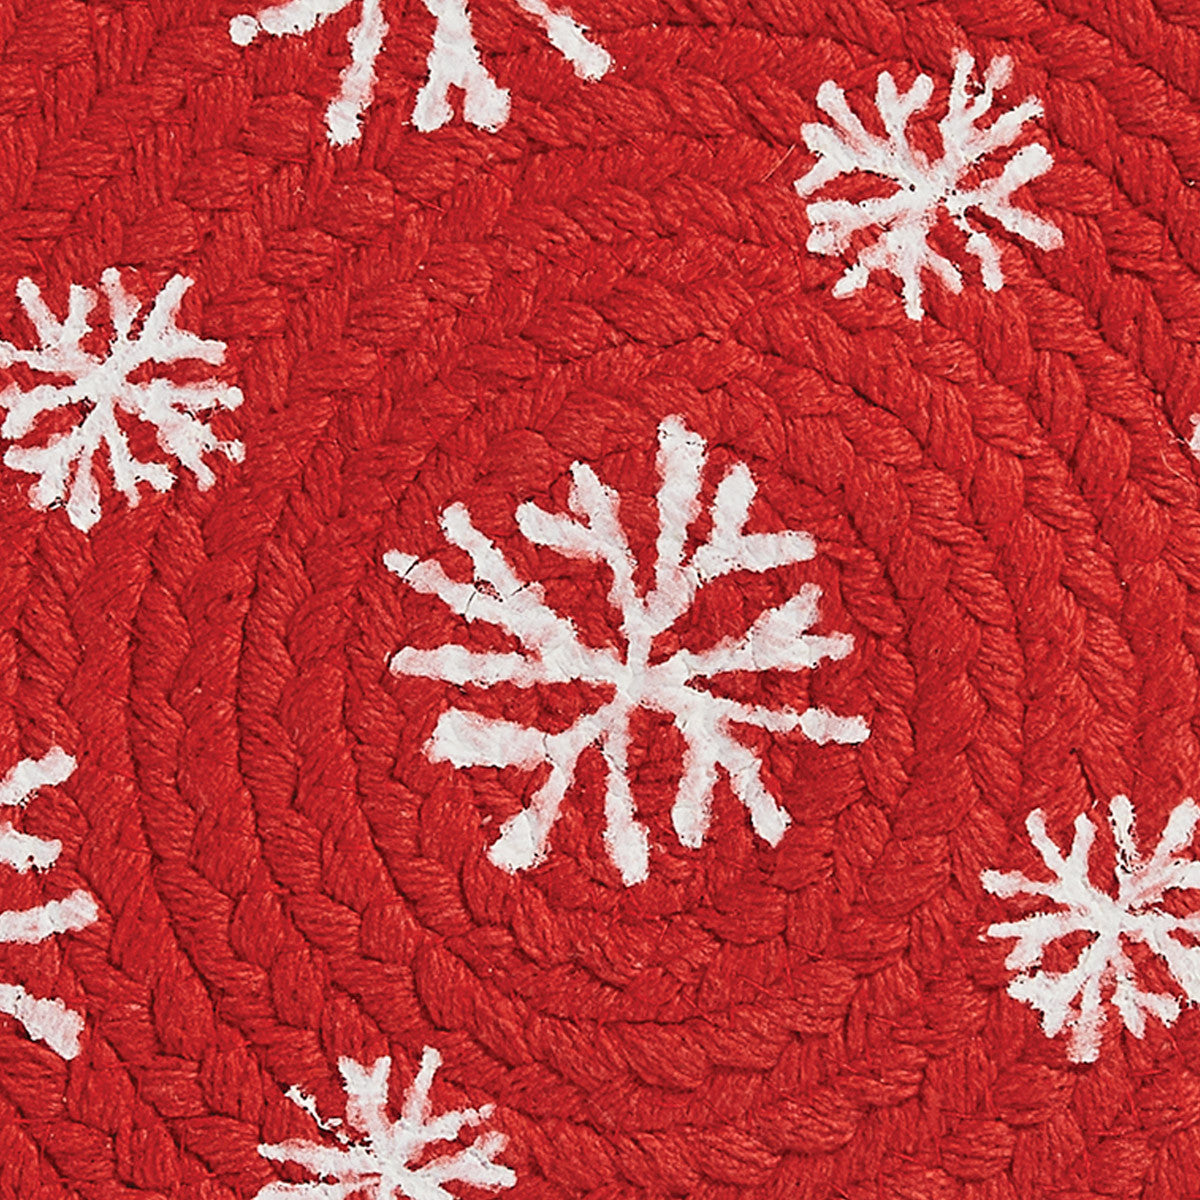 Snowflake Round Placemats - Set of 4 Park Designs